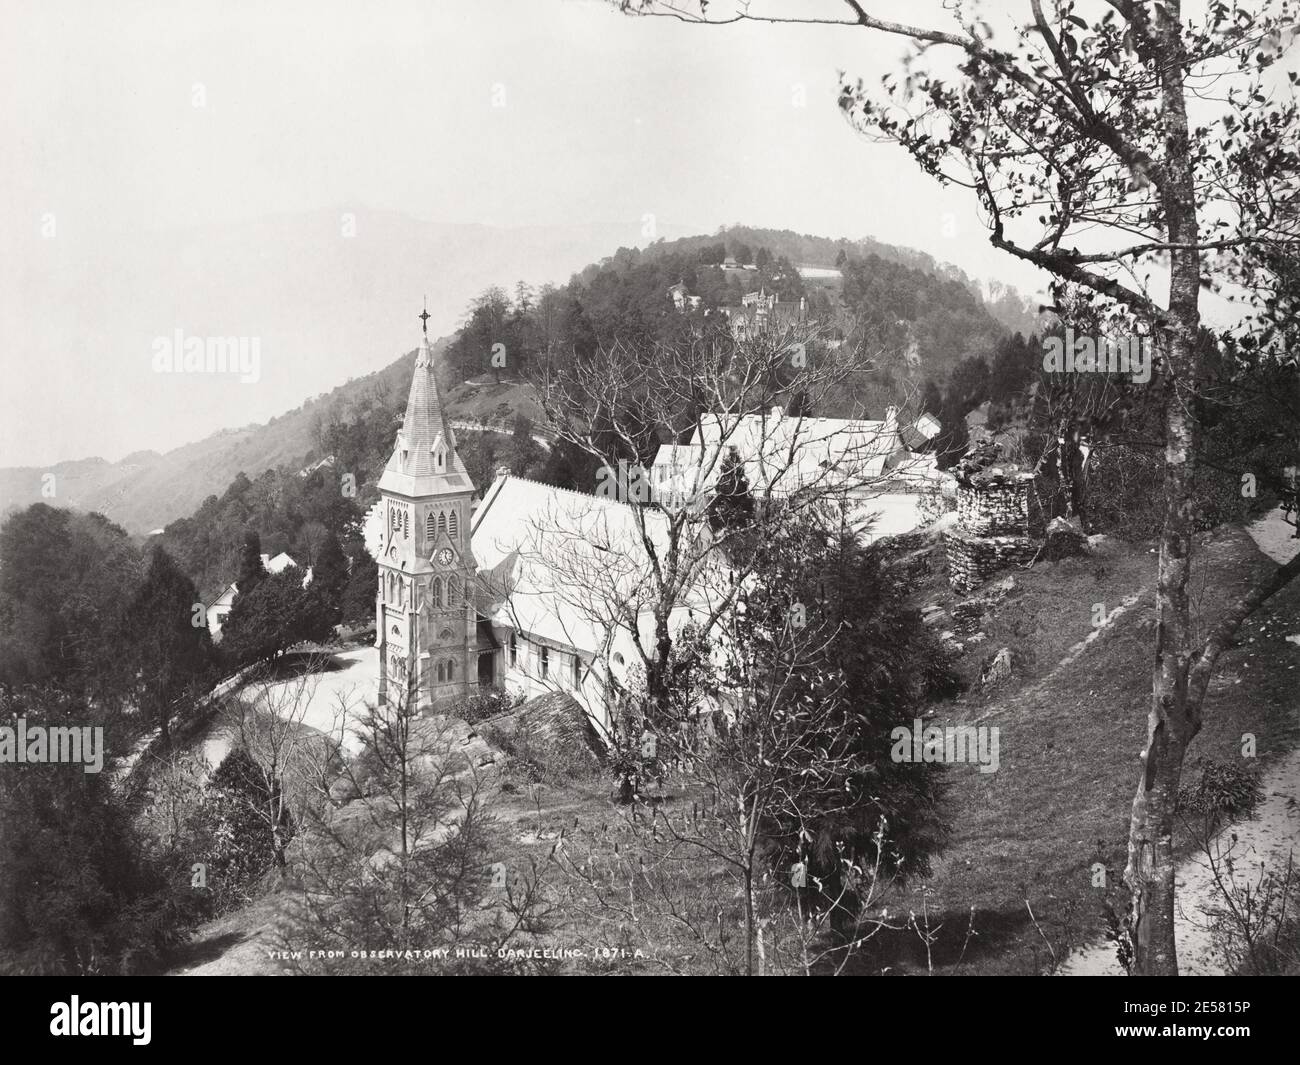 19th century vintage photograph: view of the church from Observatory Hill, Darjeeling, India. Stock Photo